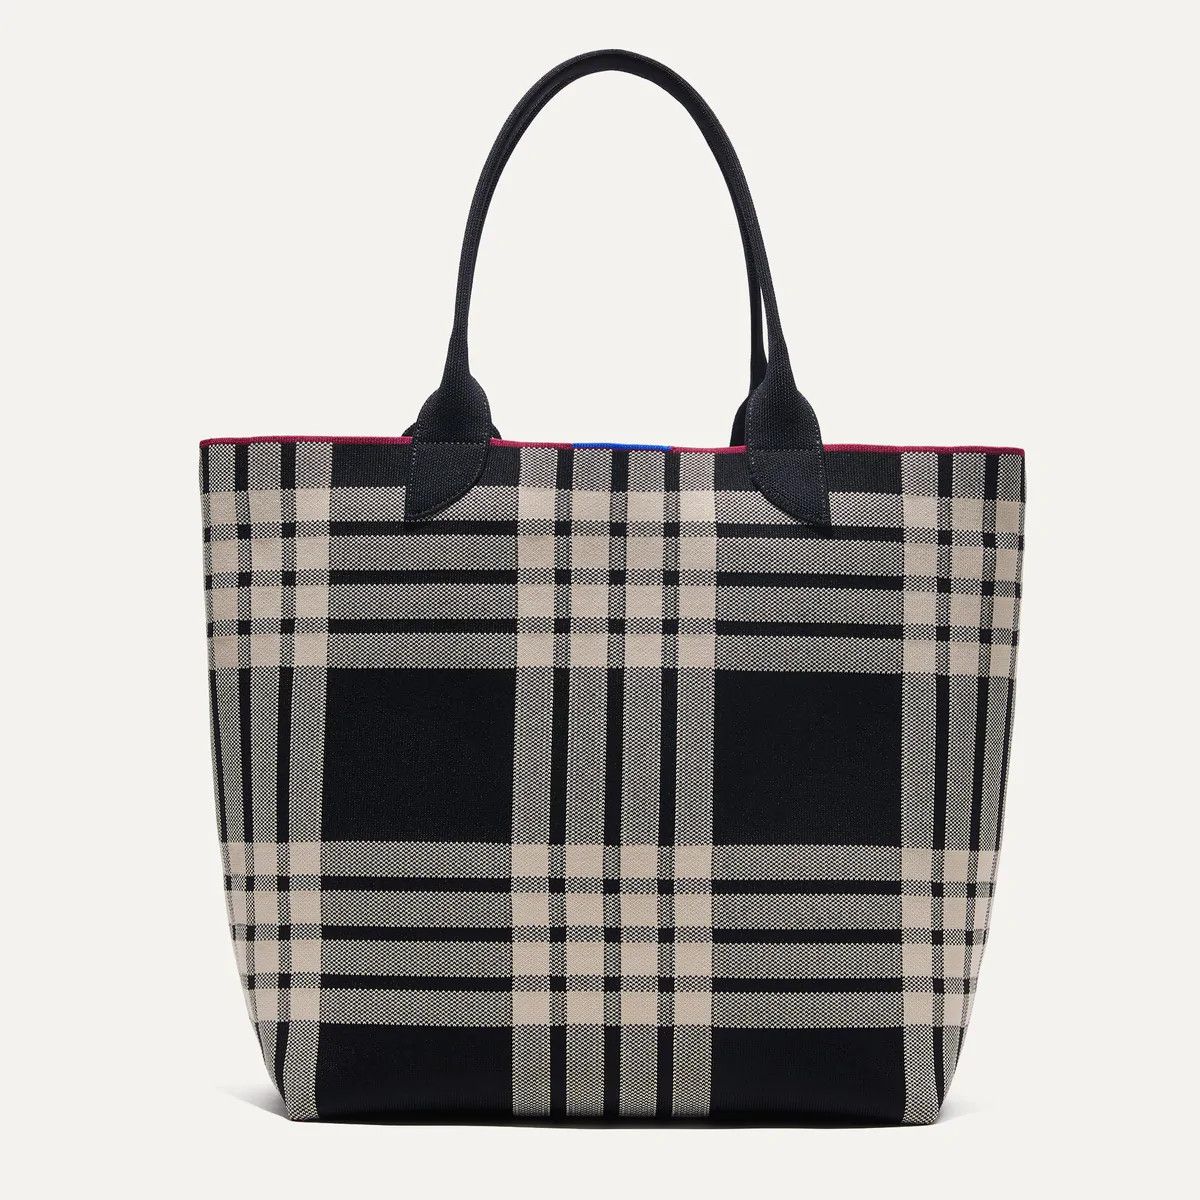 The Lightweight Tote - Blackberry Plaid | Rothy's